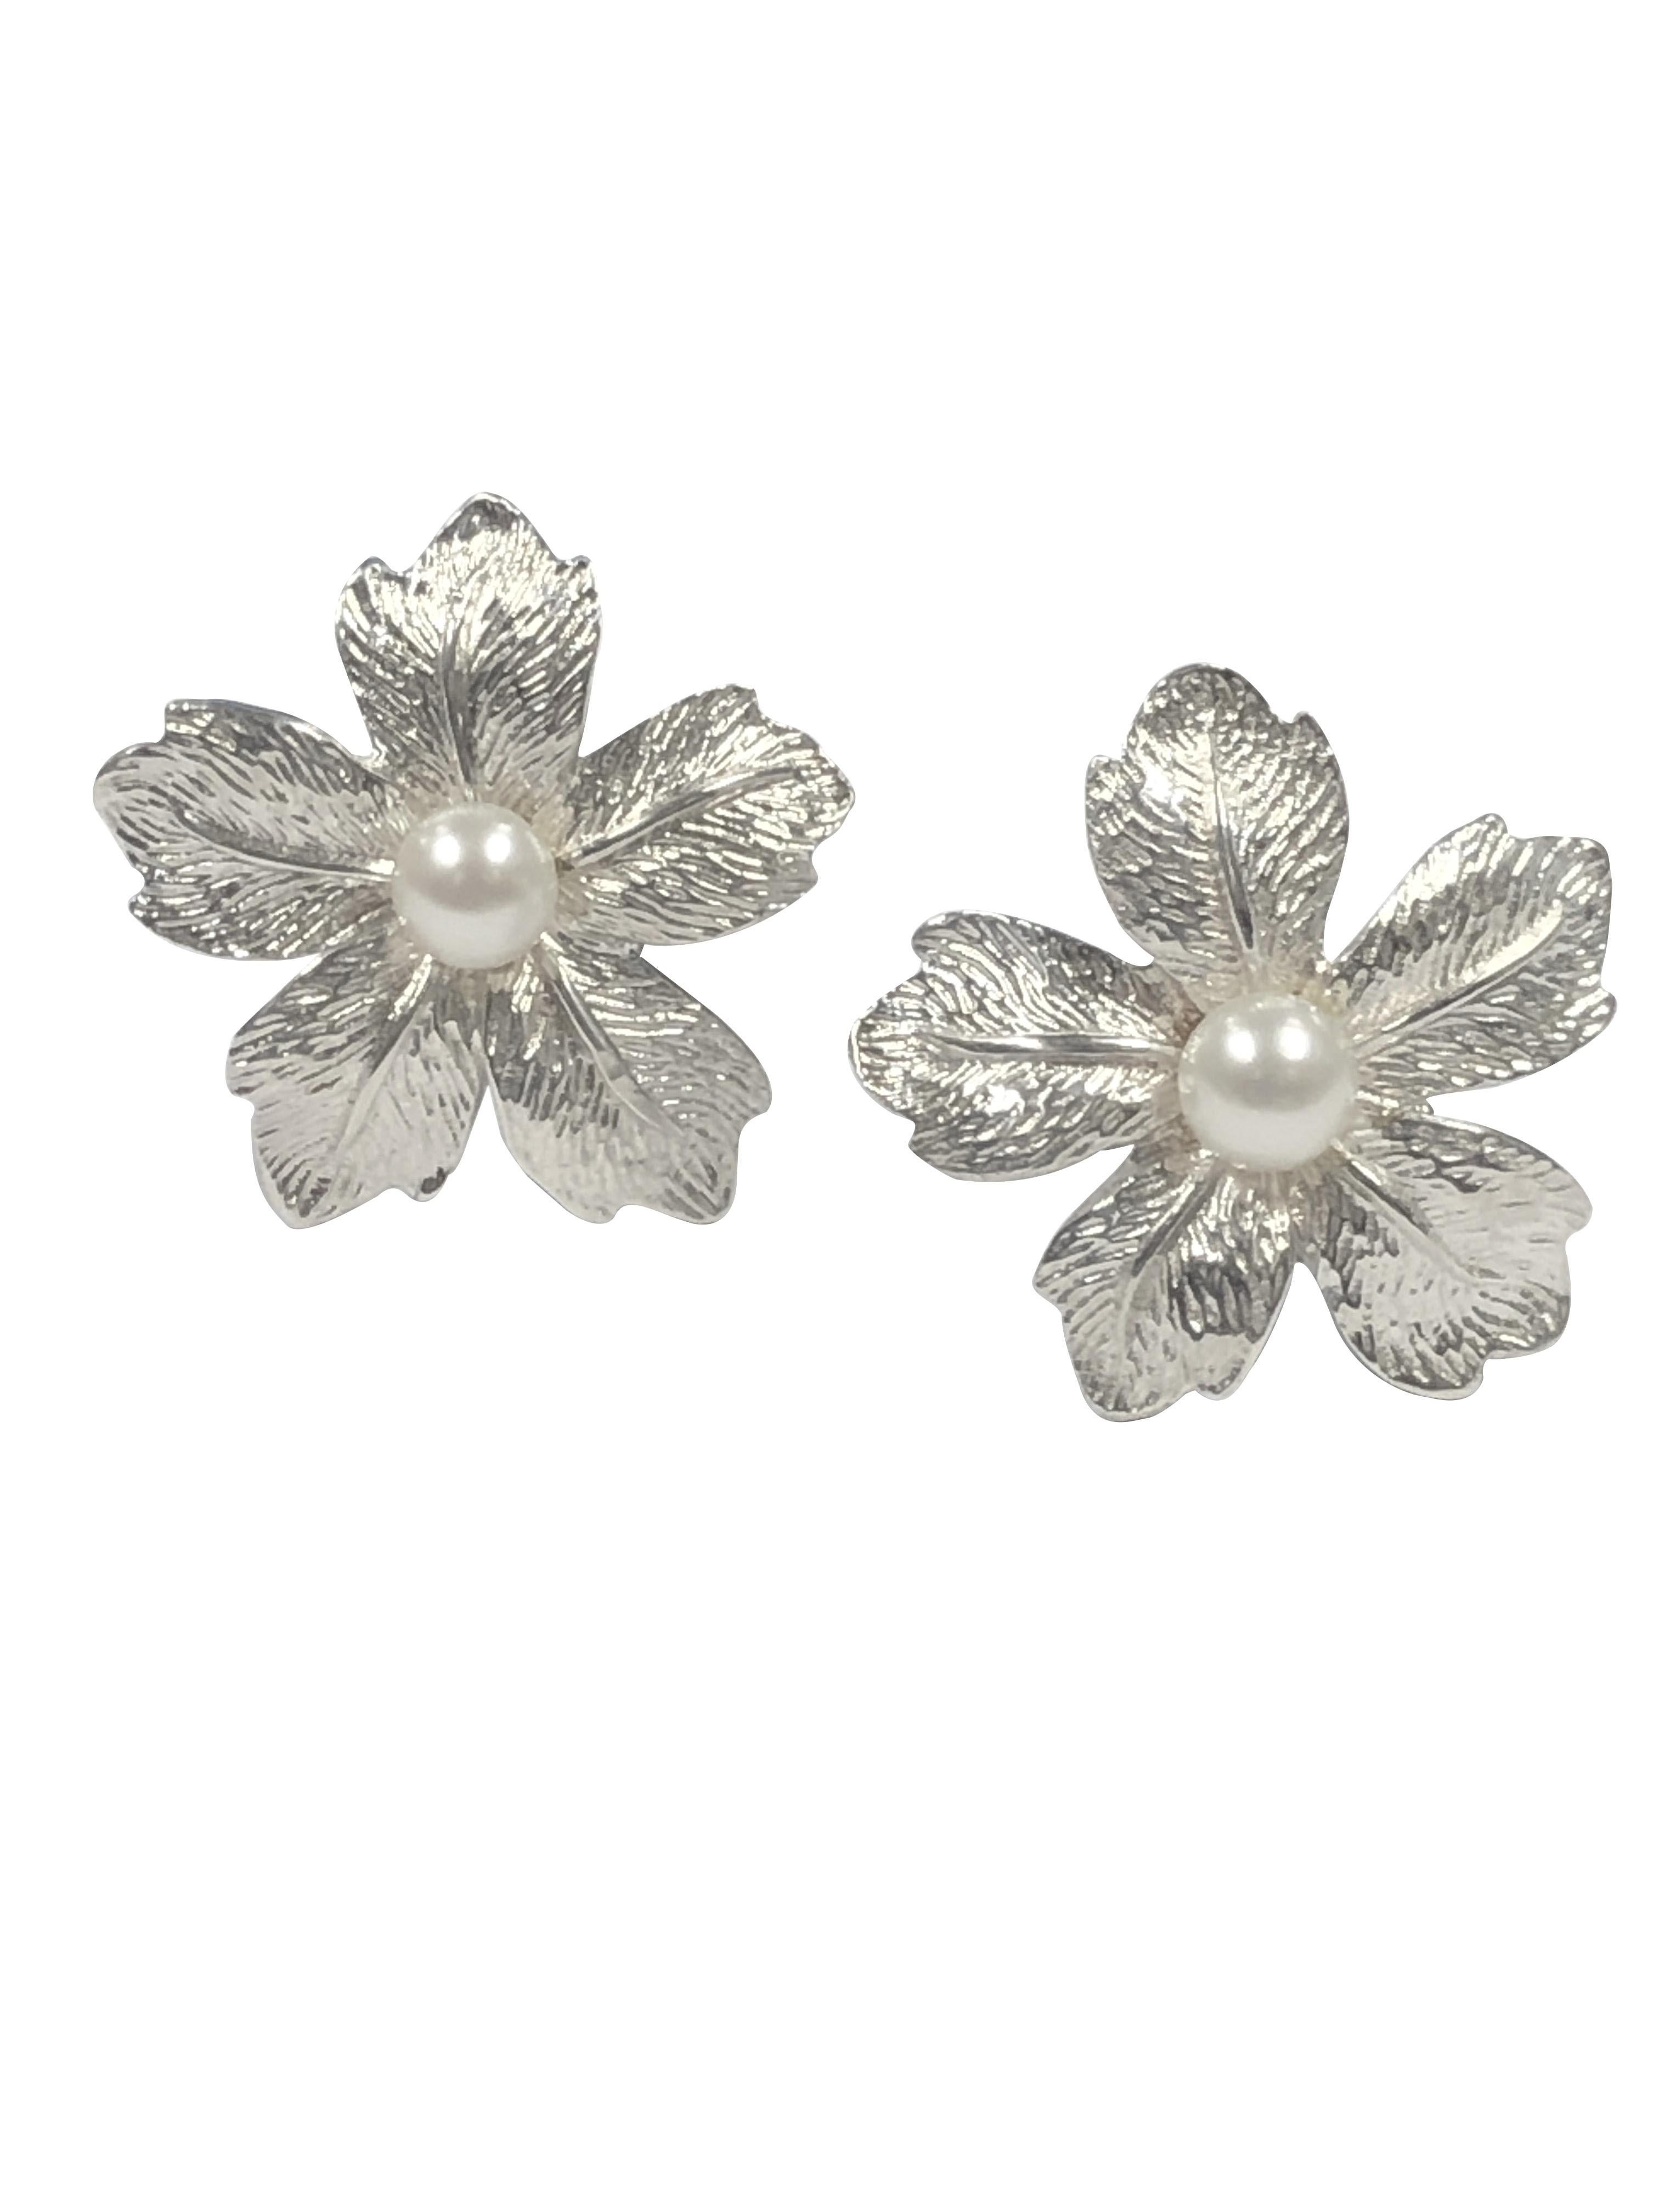 Round Cut Tiffany & Company Sterling and Pearl Flower Earrings 